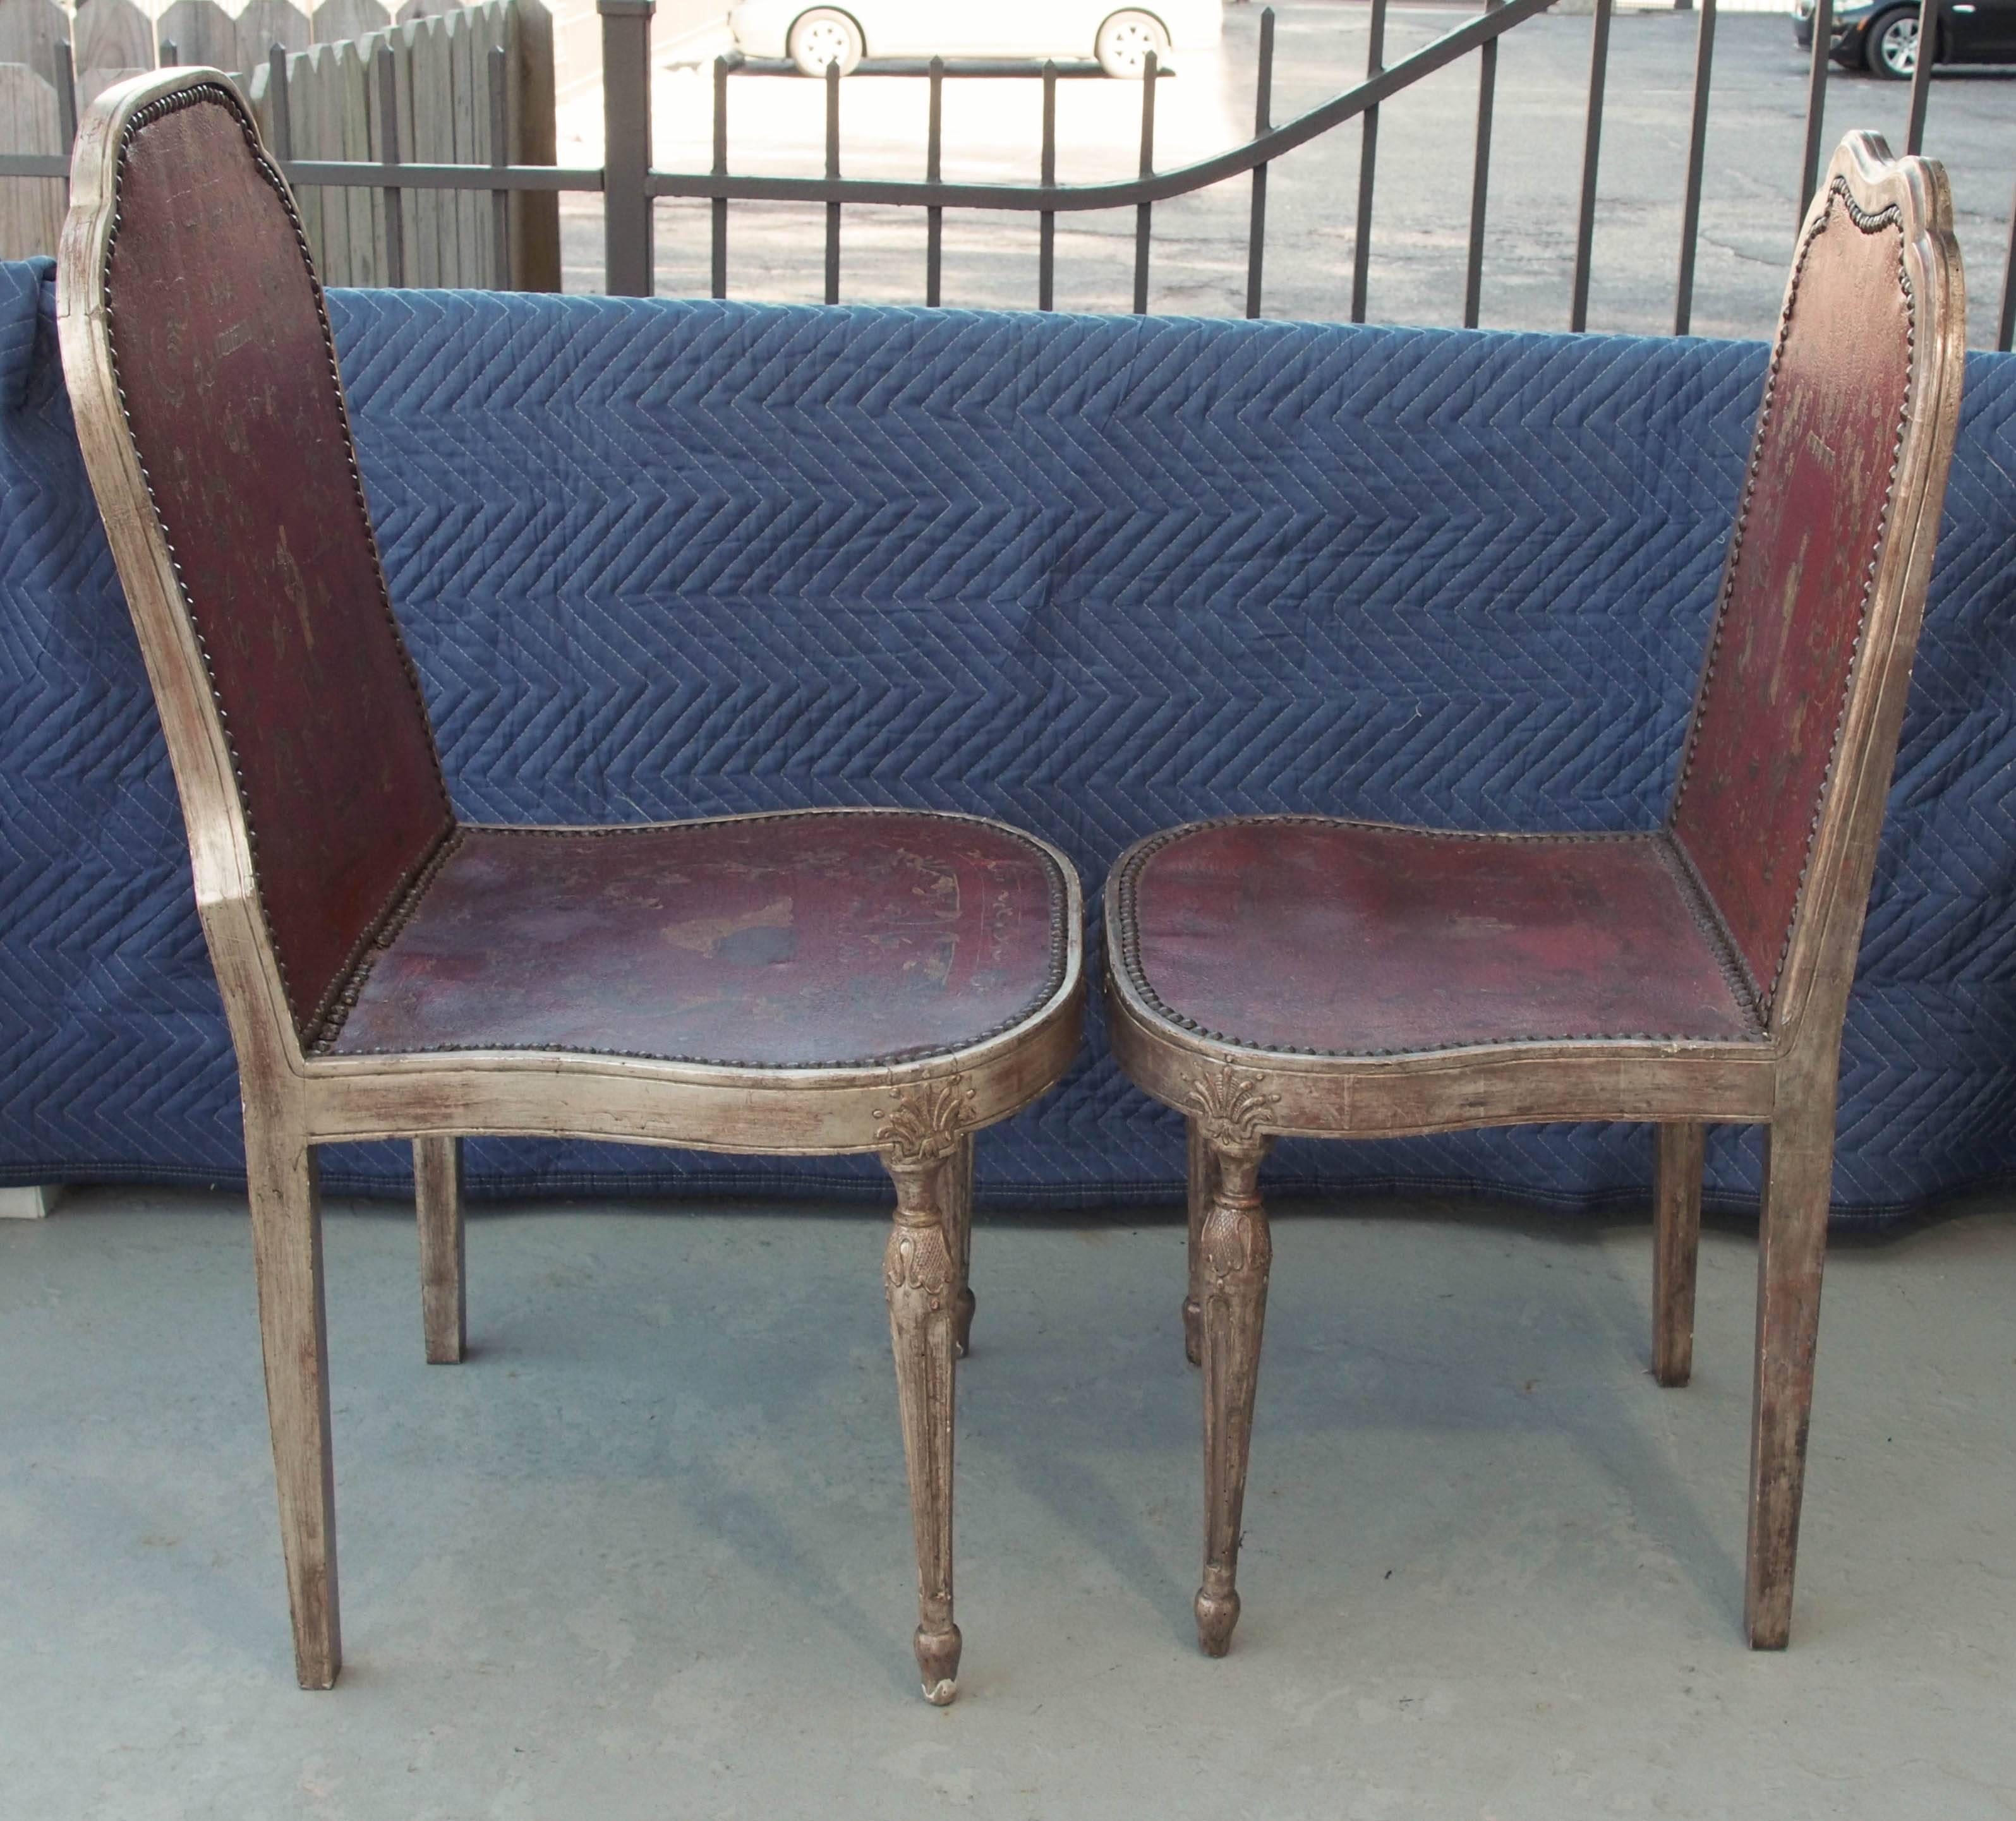 Two Sets of Four Silver Gilt Chairs with Chinoisorie Leather Seats and Backs 3